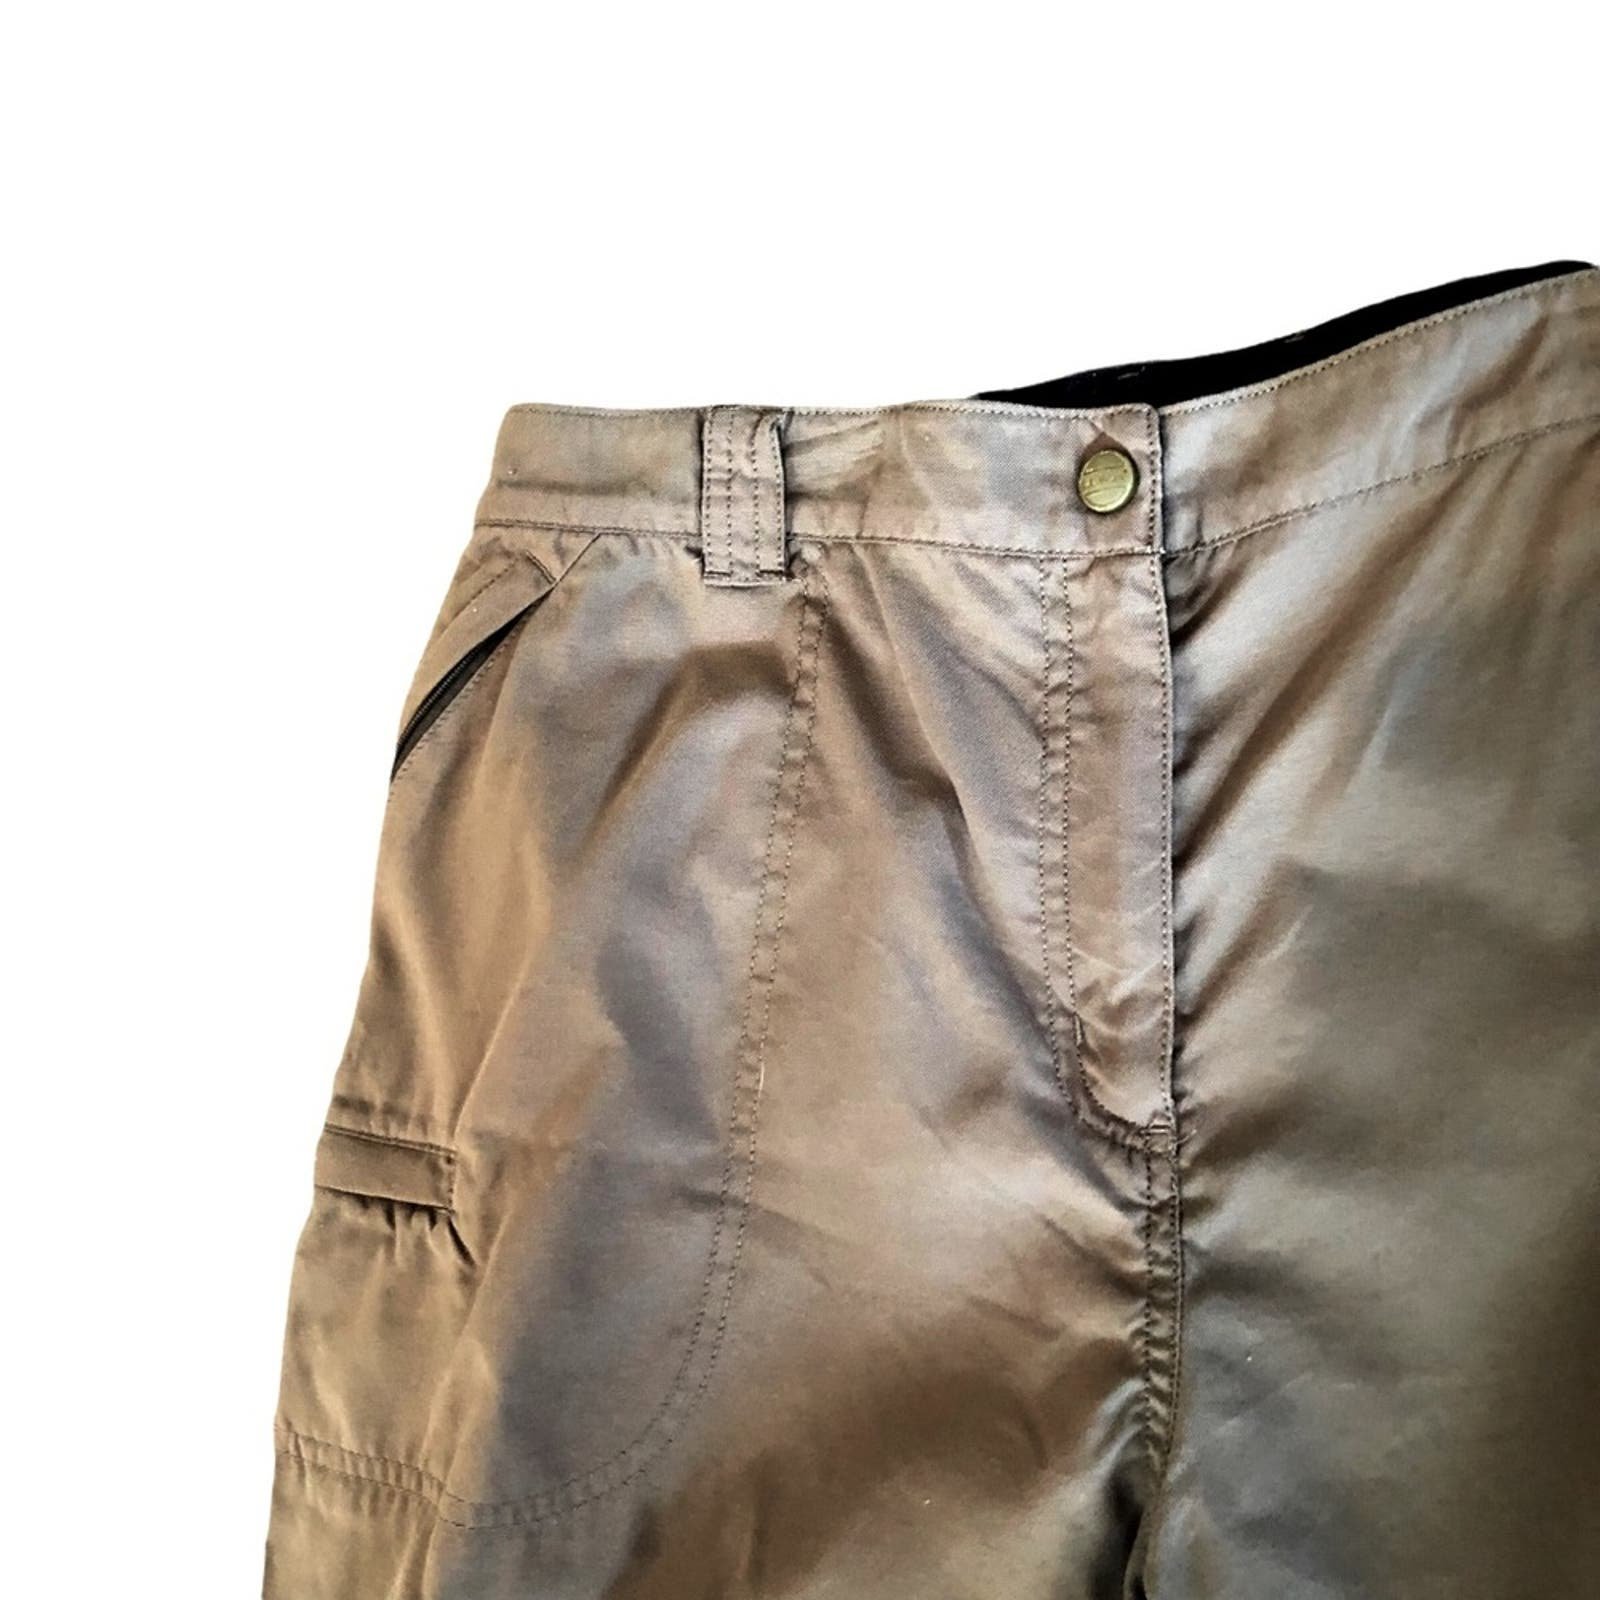 Custom L.L. Bean outdoor shorts hiking camping Cargo 100% nylon Olive Green Army Large iRxEvAYia outlet online shop